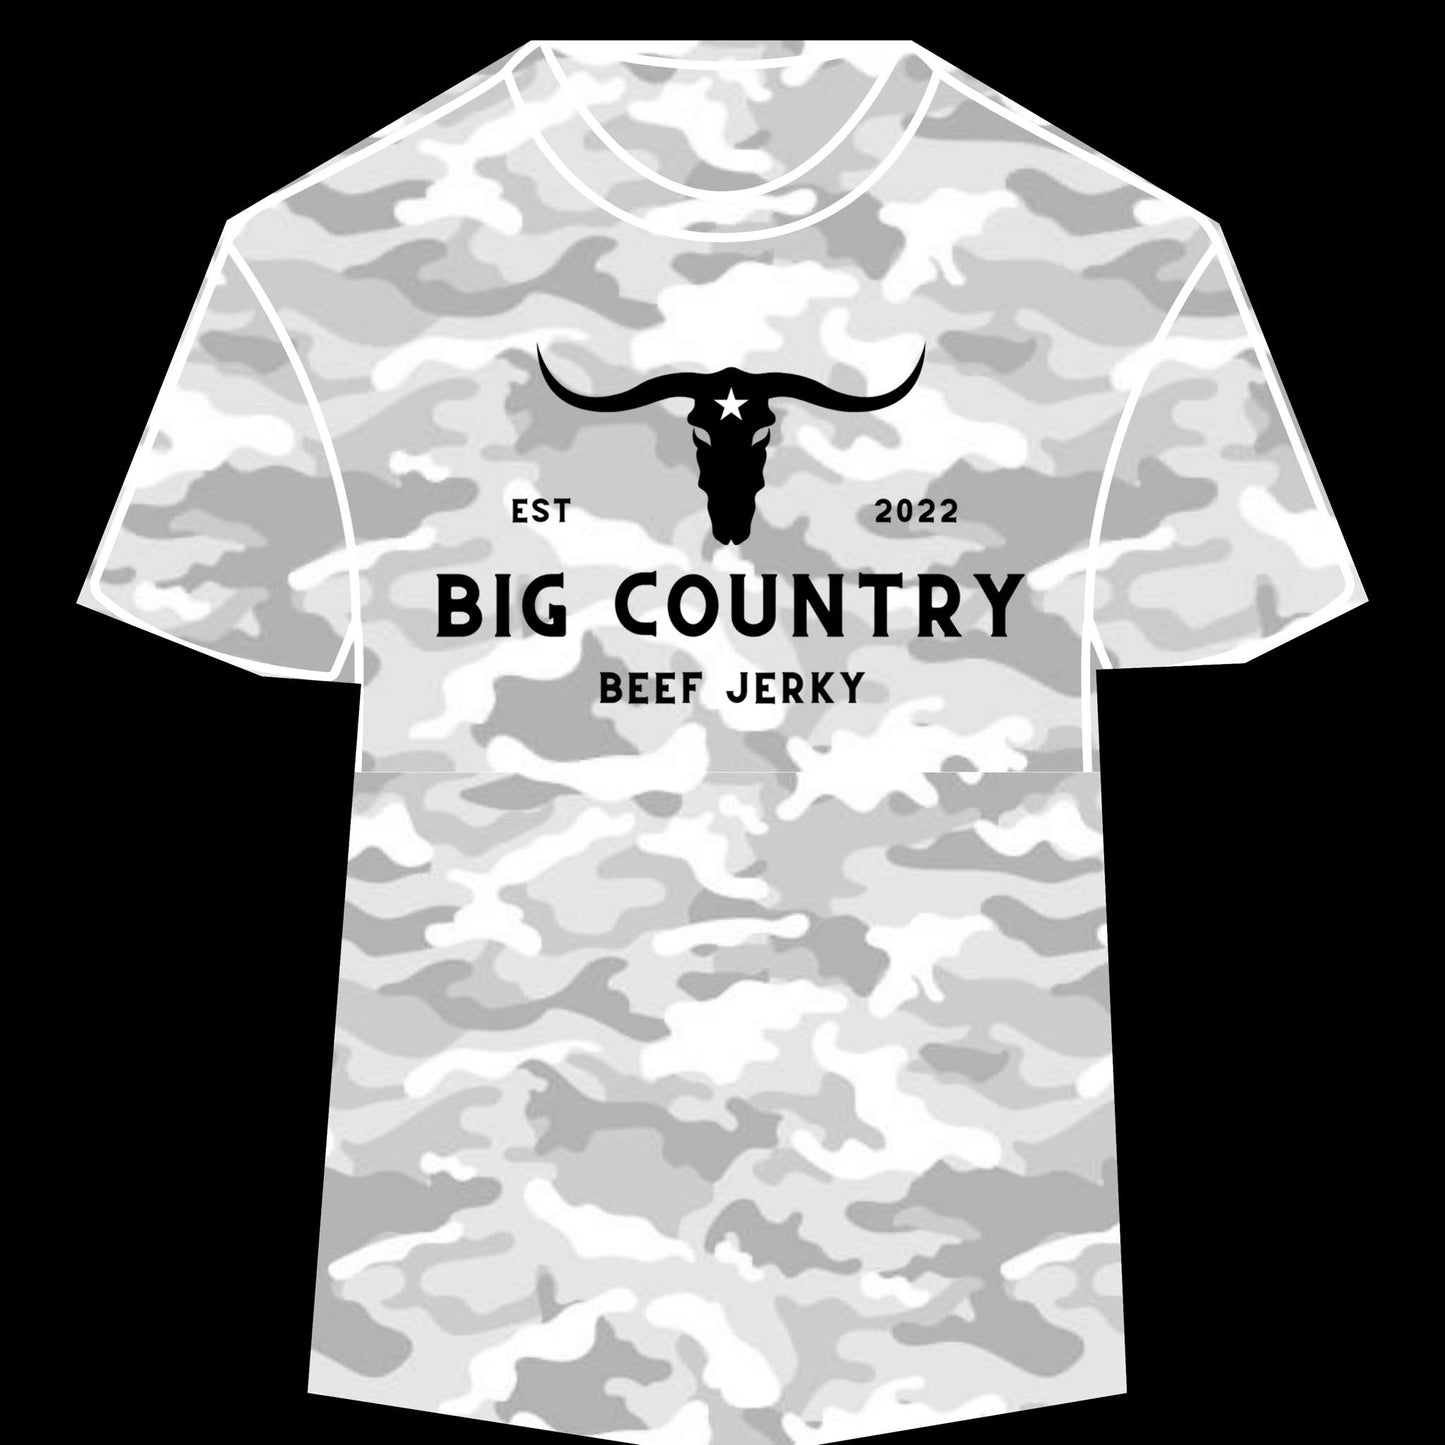 Big Country Jersey